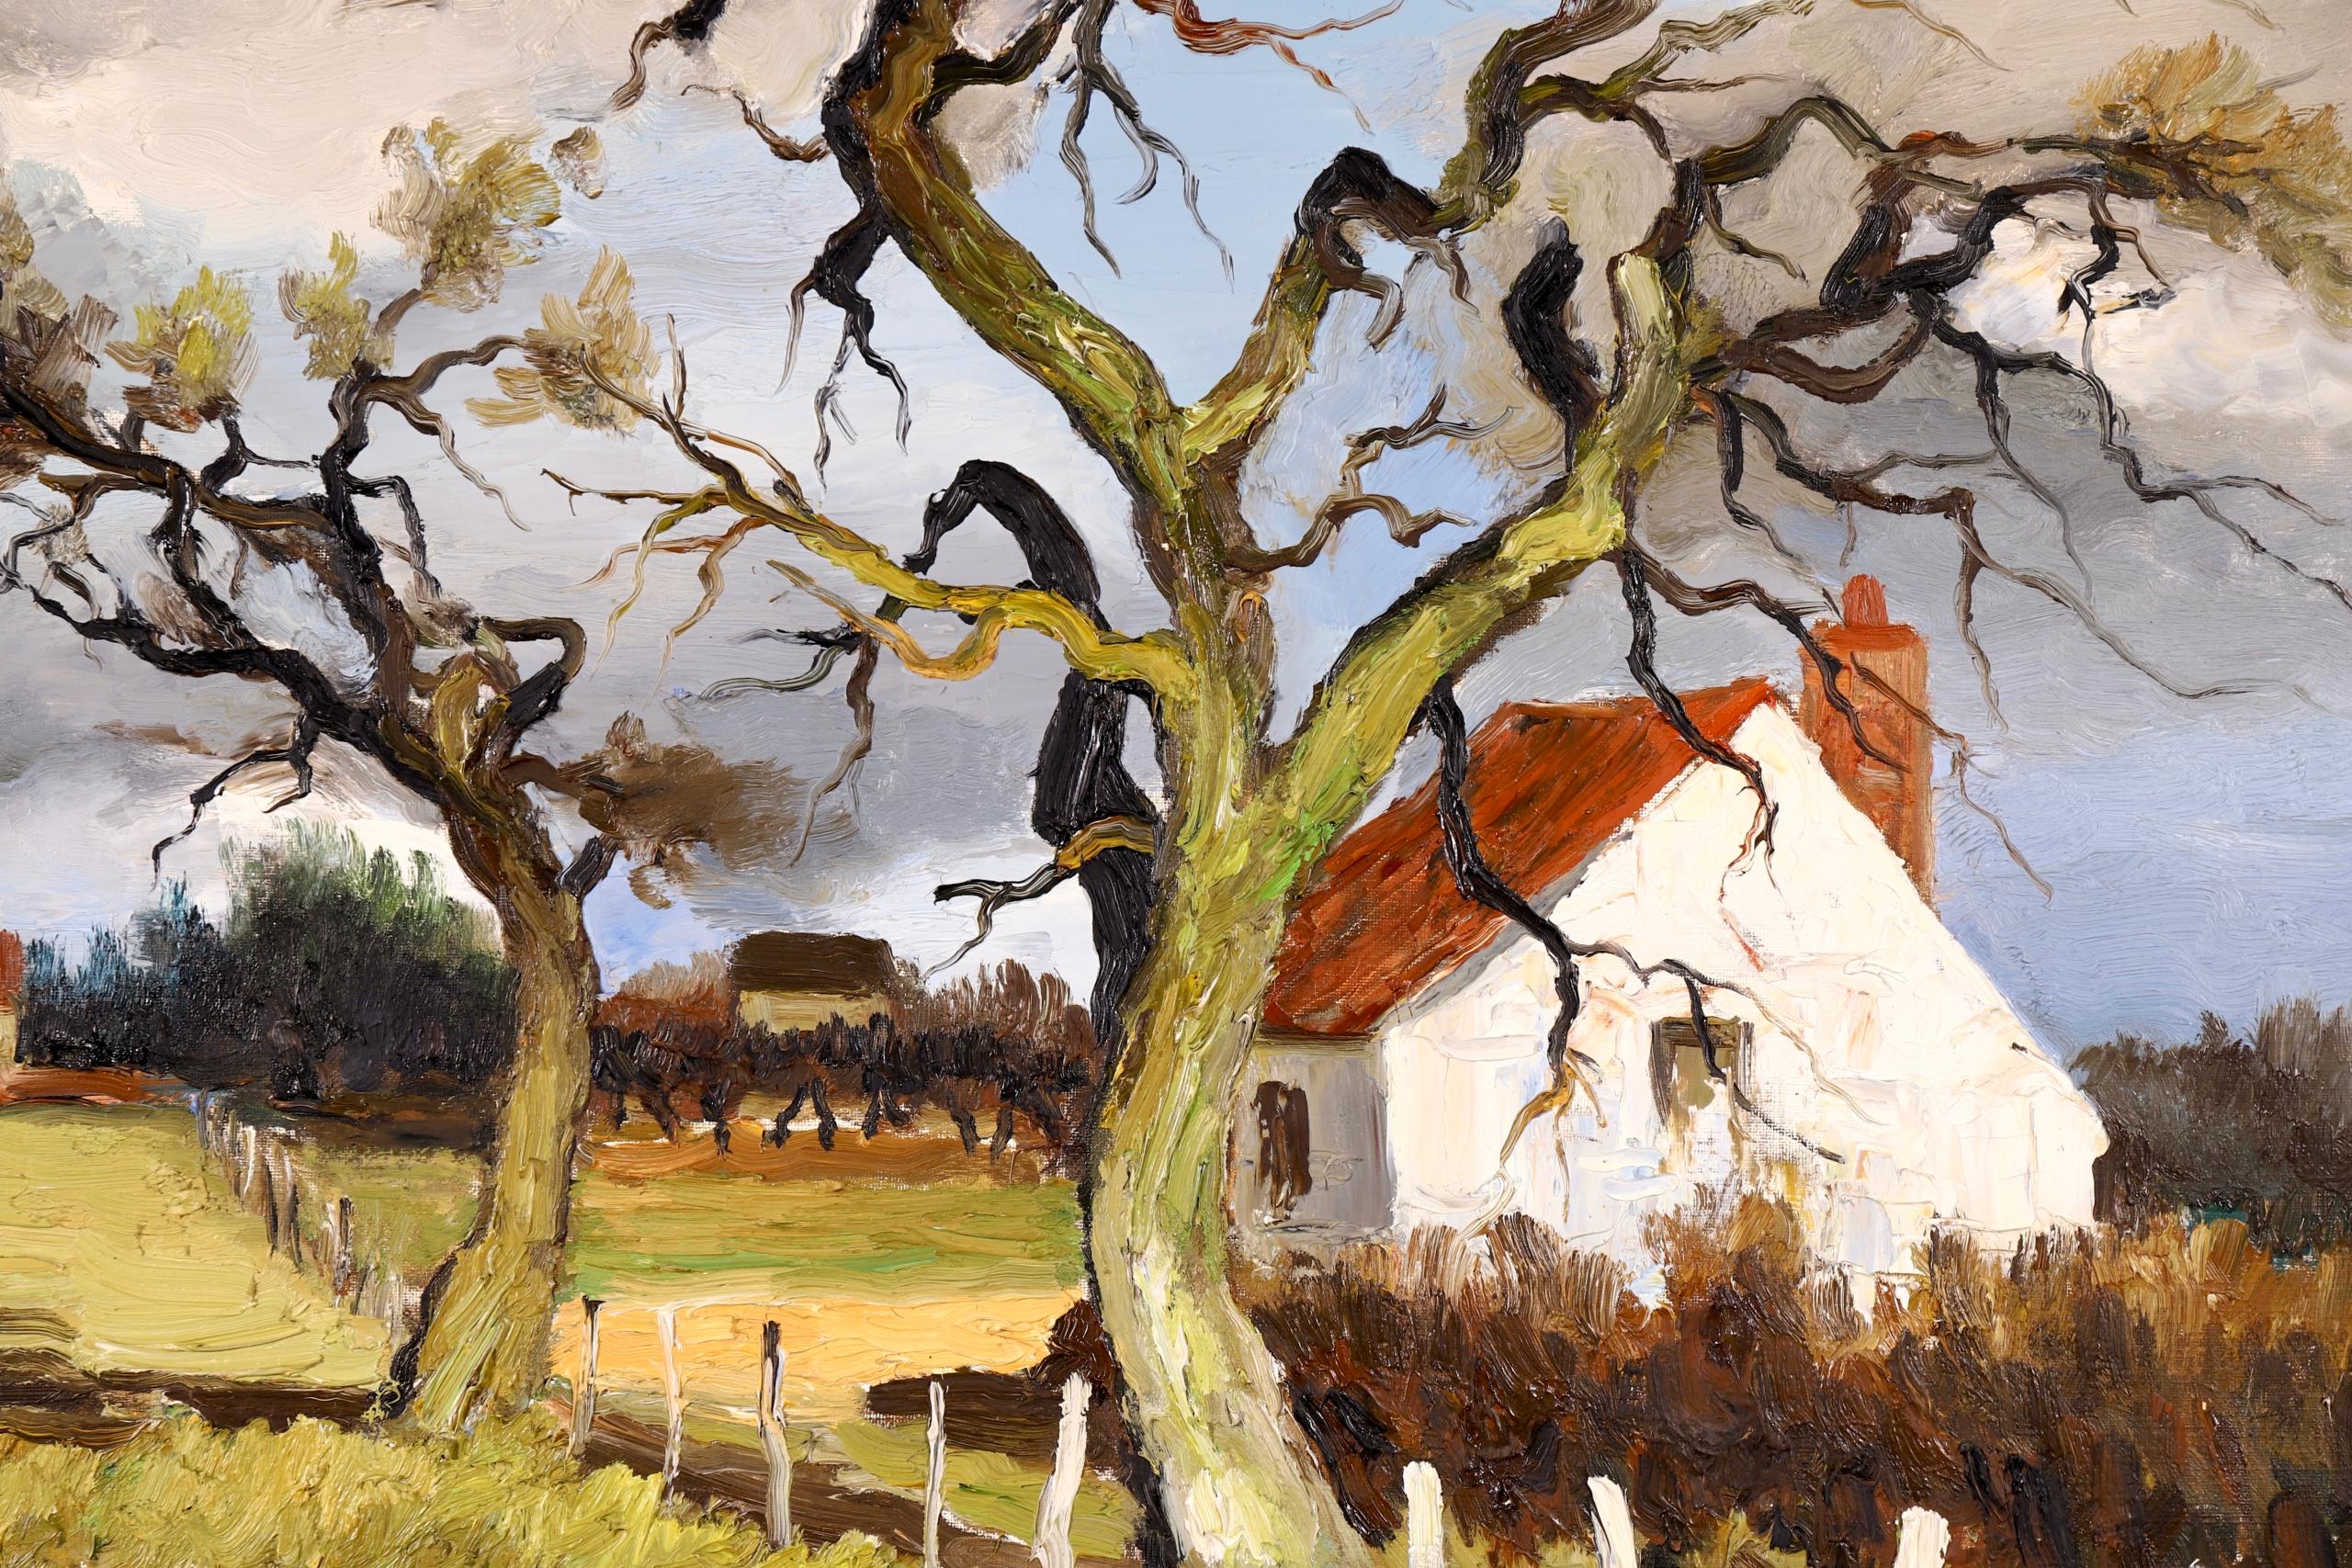 A beautiful oil on canvas circa 1960 by sought after French post impressionist painter Marcel Dyf. The work depicts an orchard on a farm in winter. There is a white cottage with red tiled roof to the right beside bare trees and other farmhouses